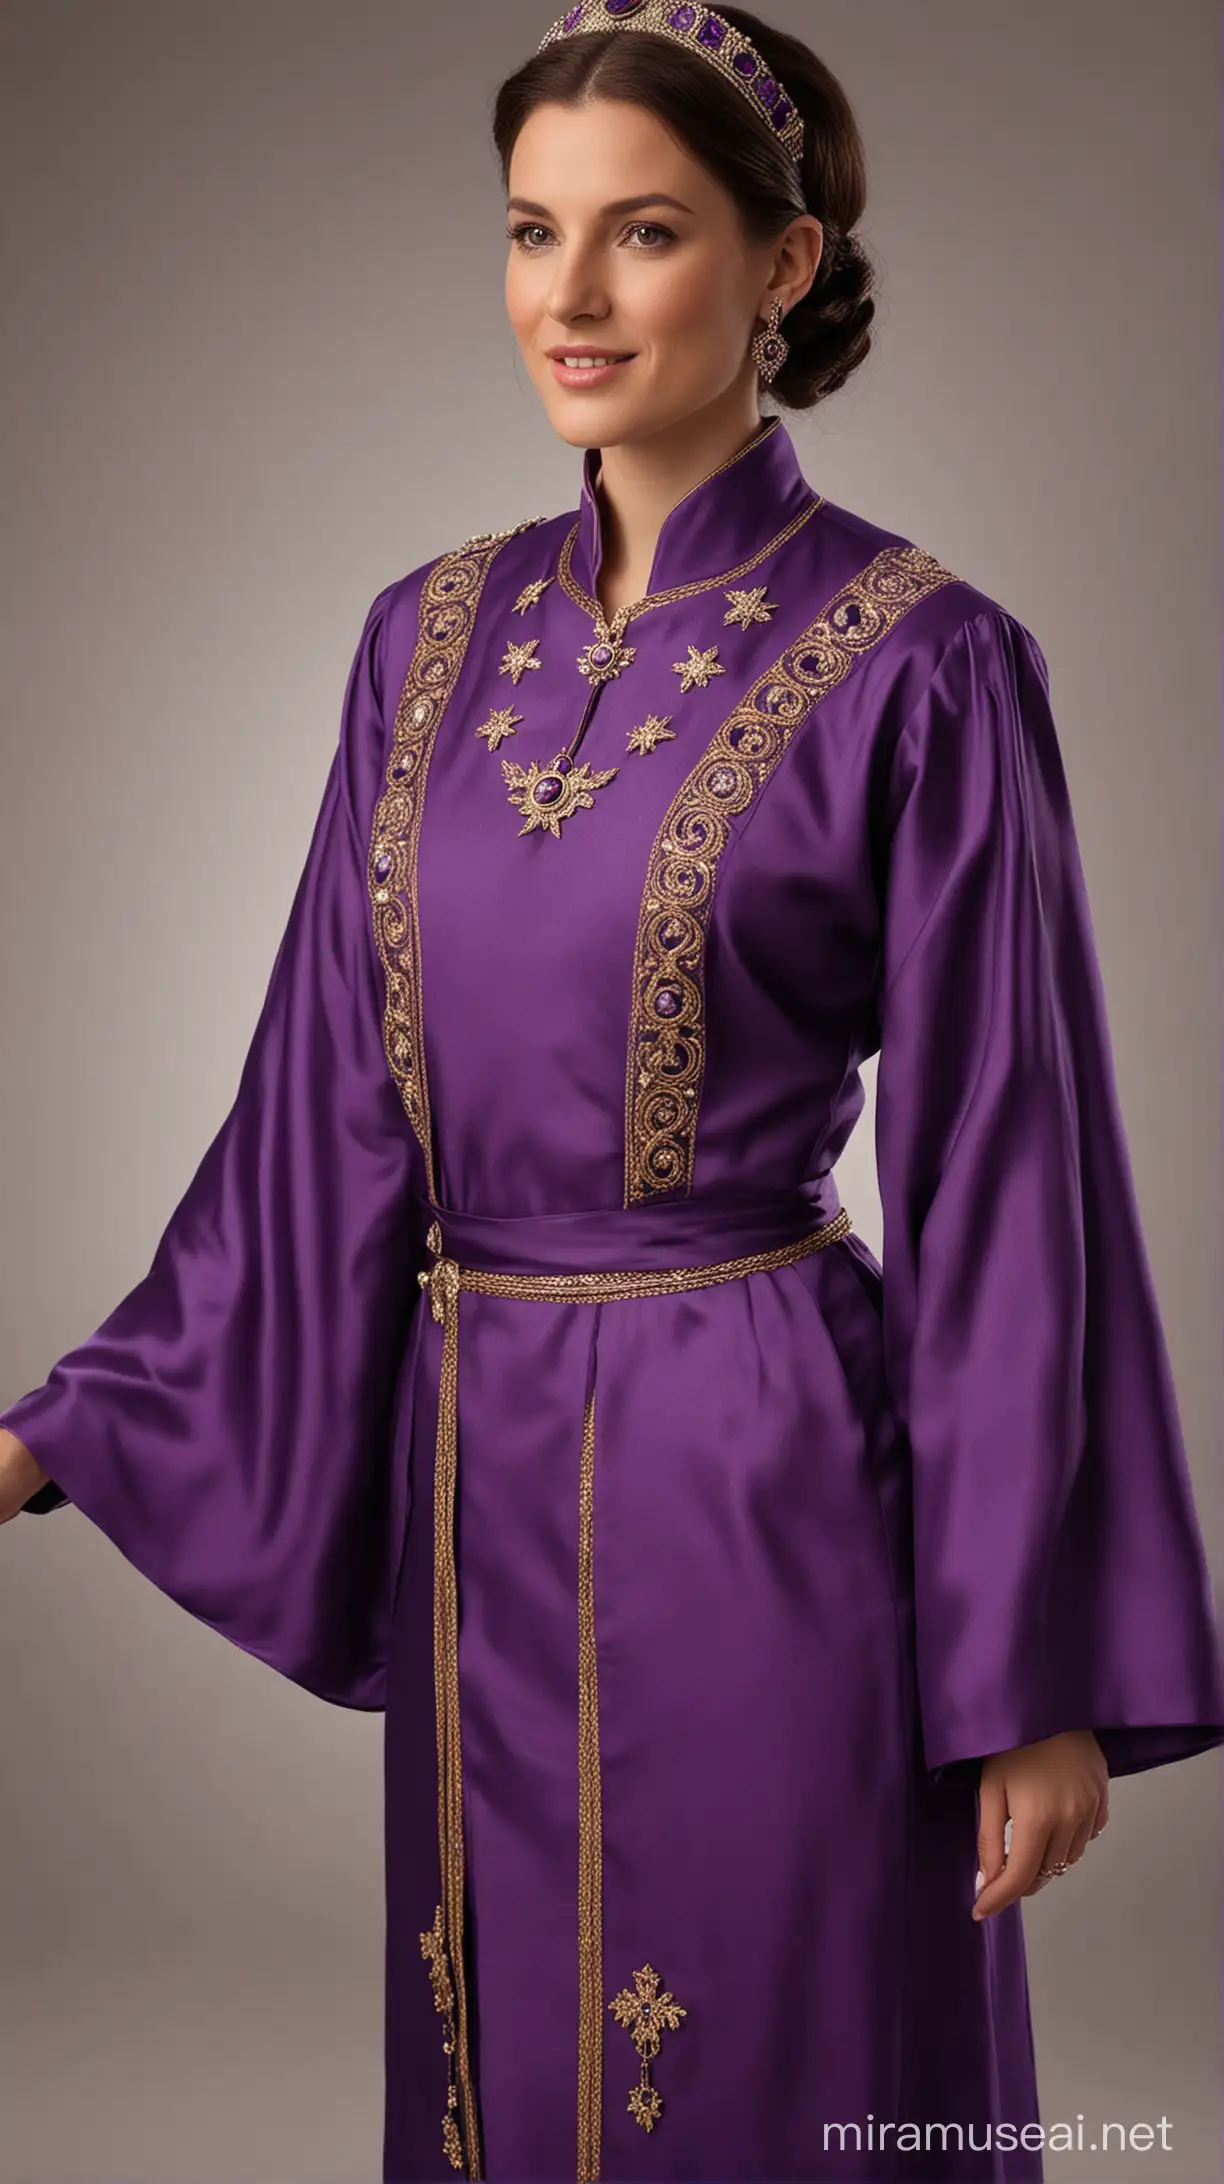 Include visual cues such as imperial insignias or senatorial robes to emphasize the significance of purple clothing.